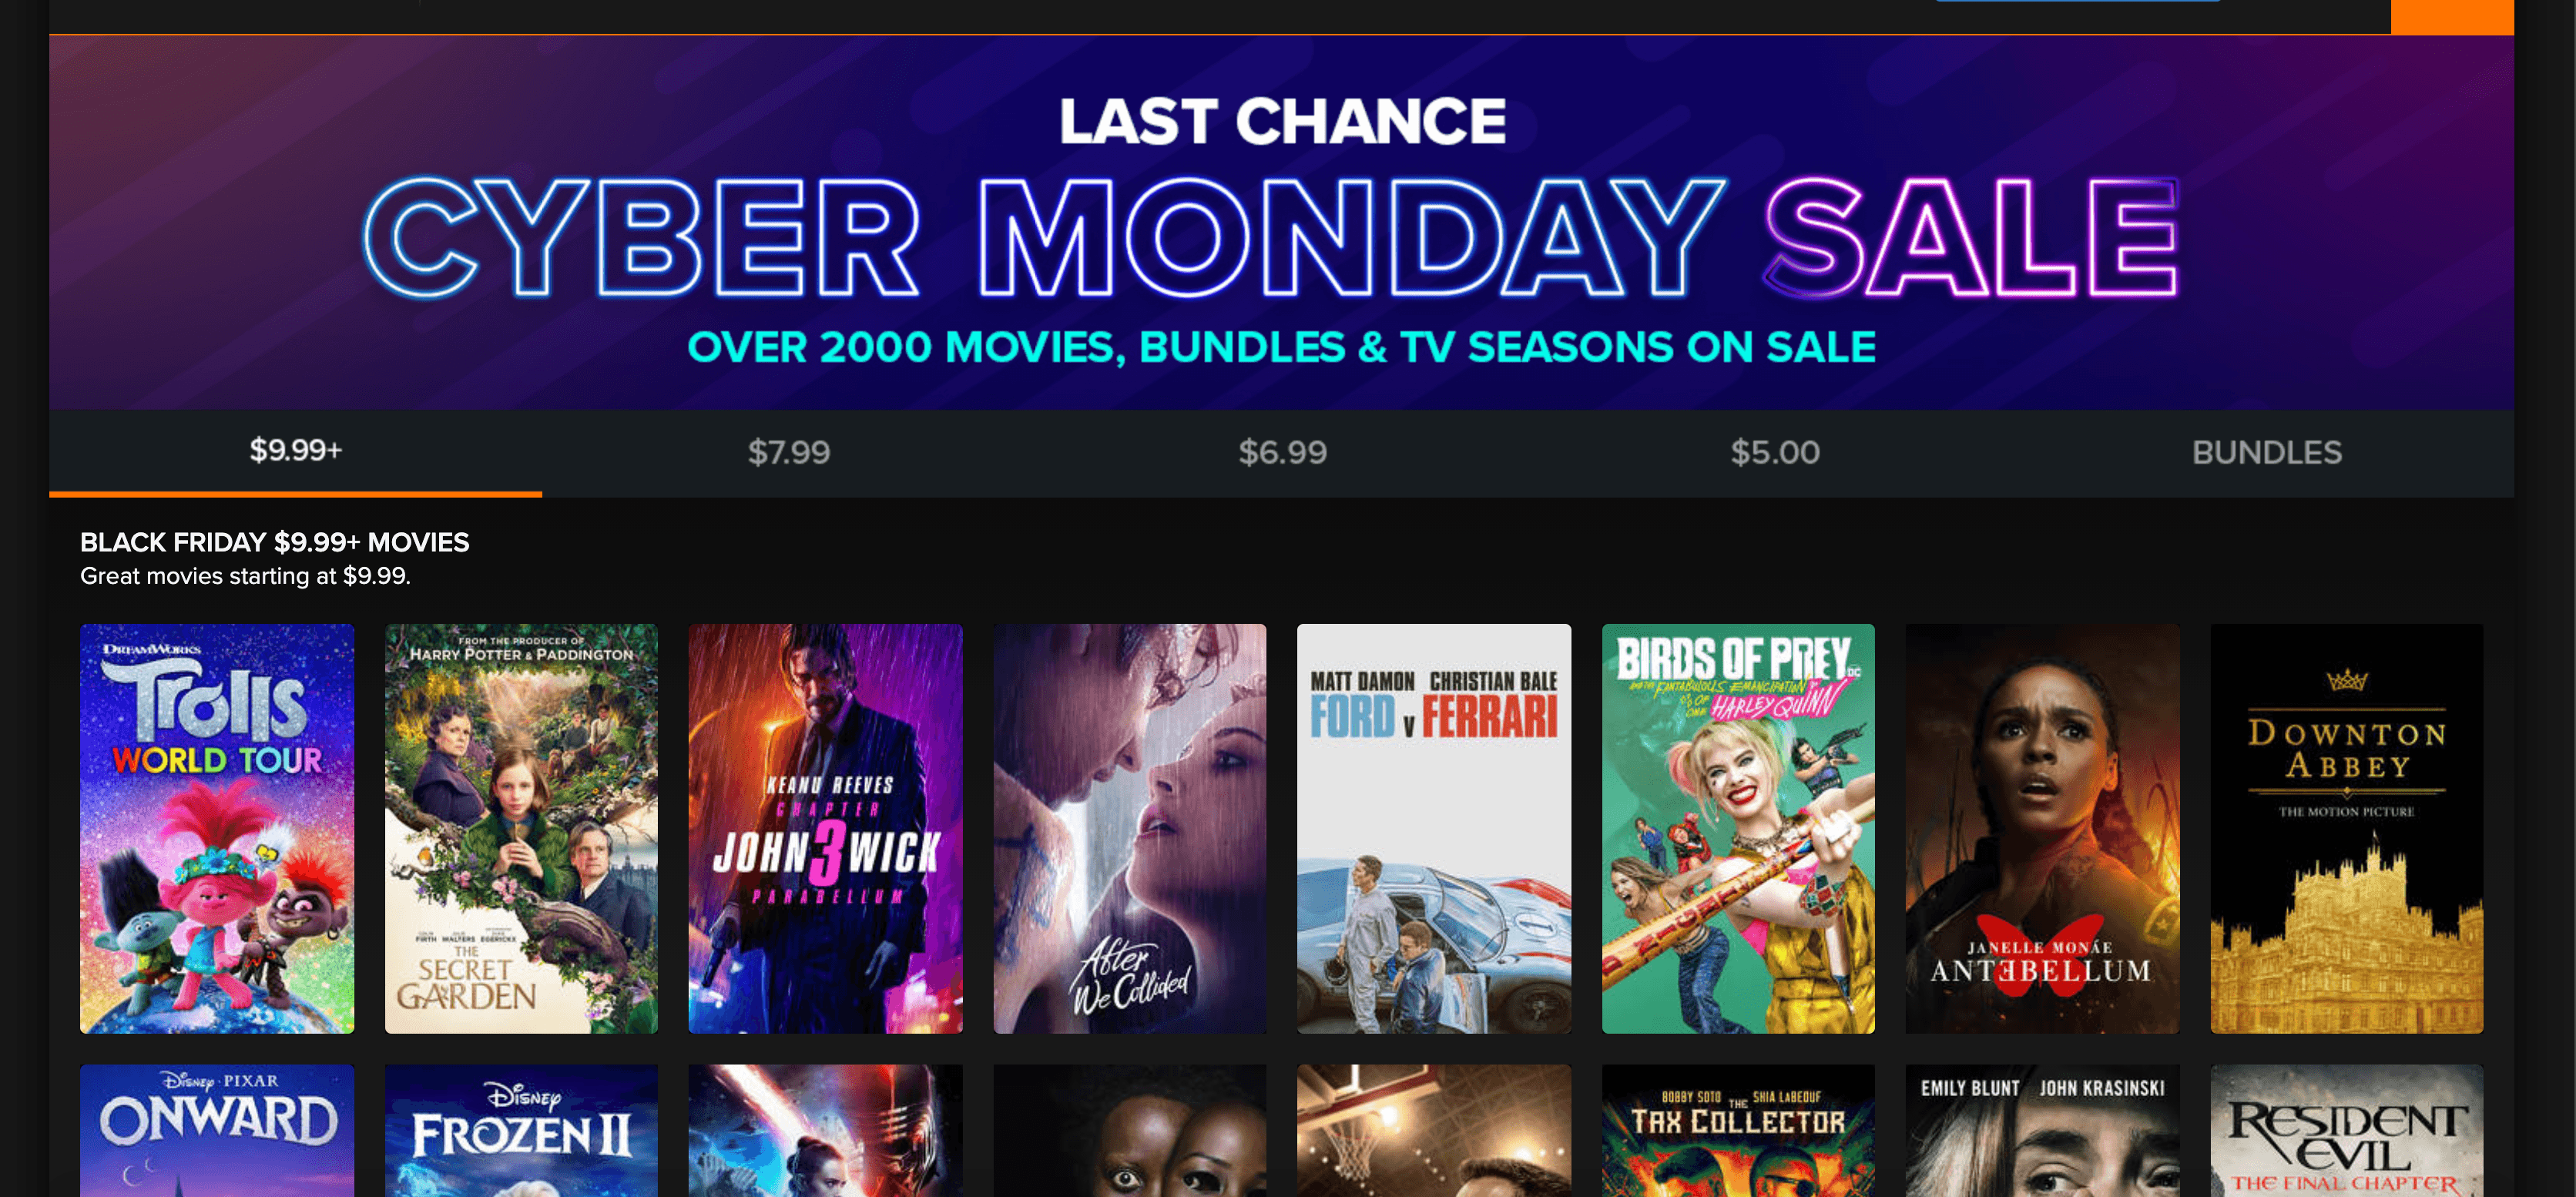 Get Complete First Seasons for $4, Plus More Deals on FandangoNOW and Vudu